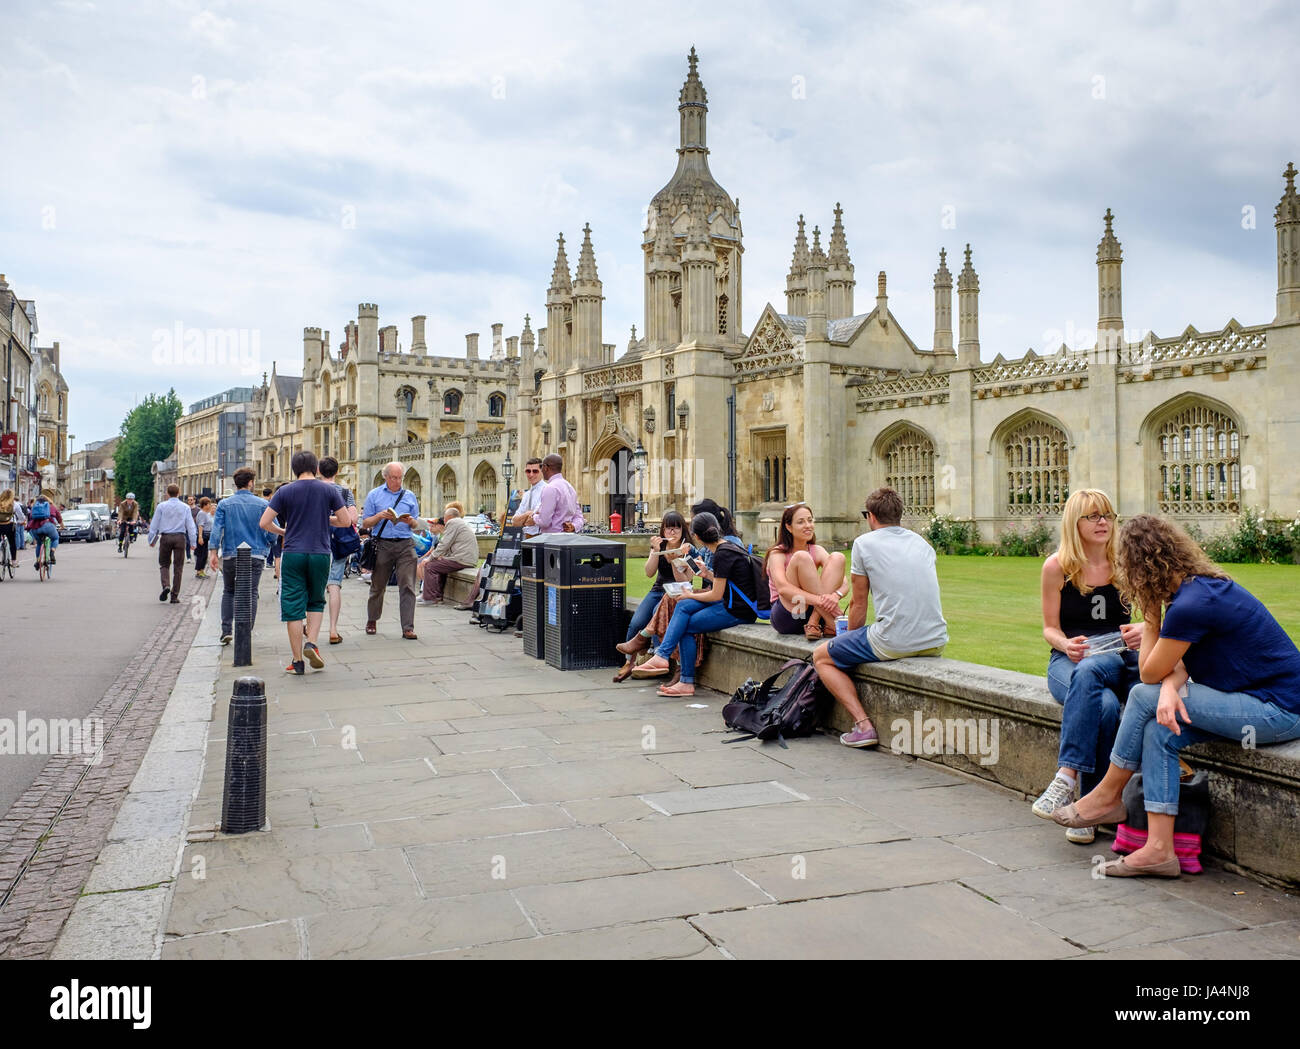 A variety of people sit on the low wall outside the front of King's college, university of Cambridge, England. Stock Photo